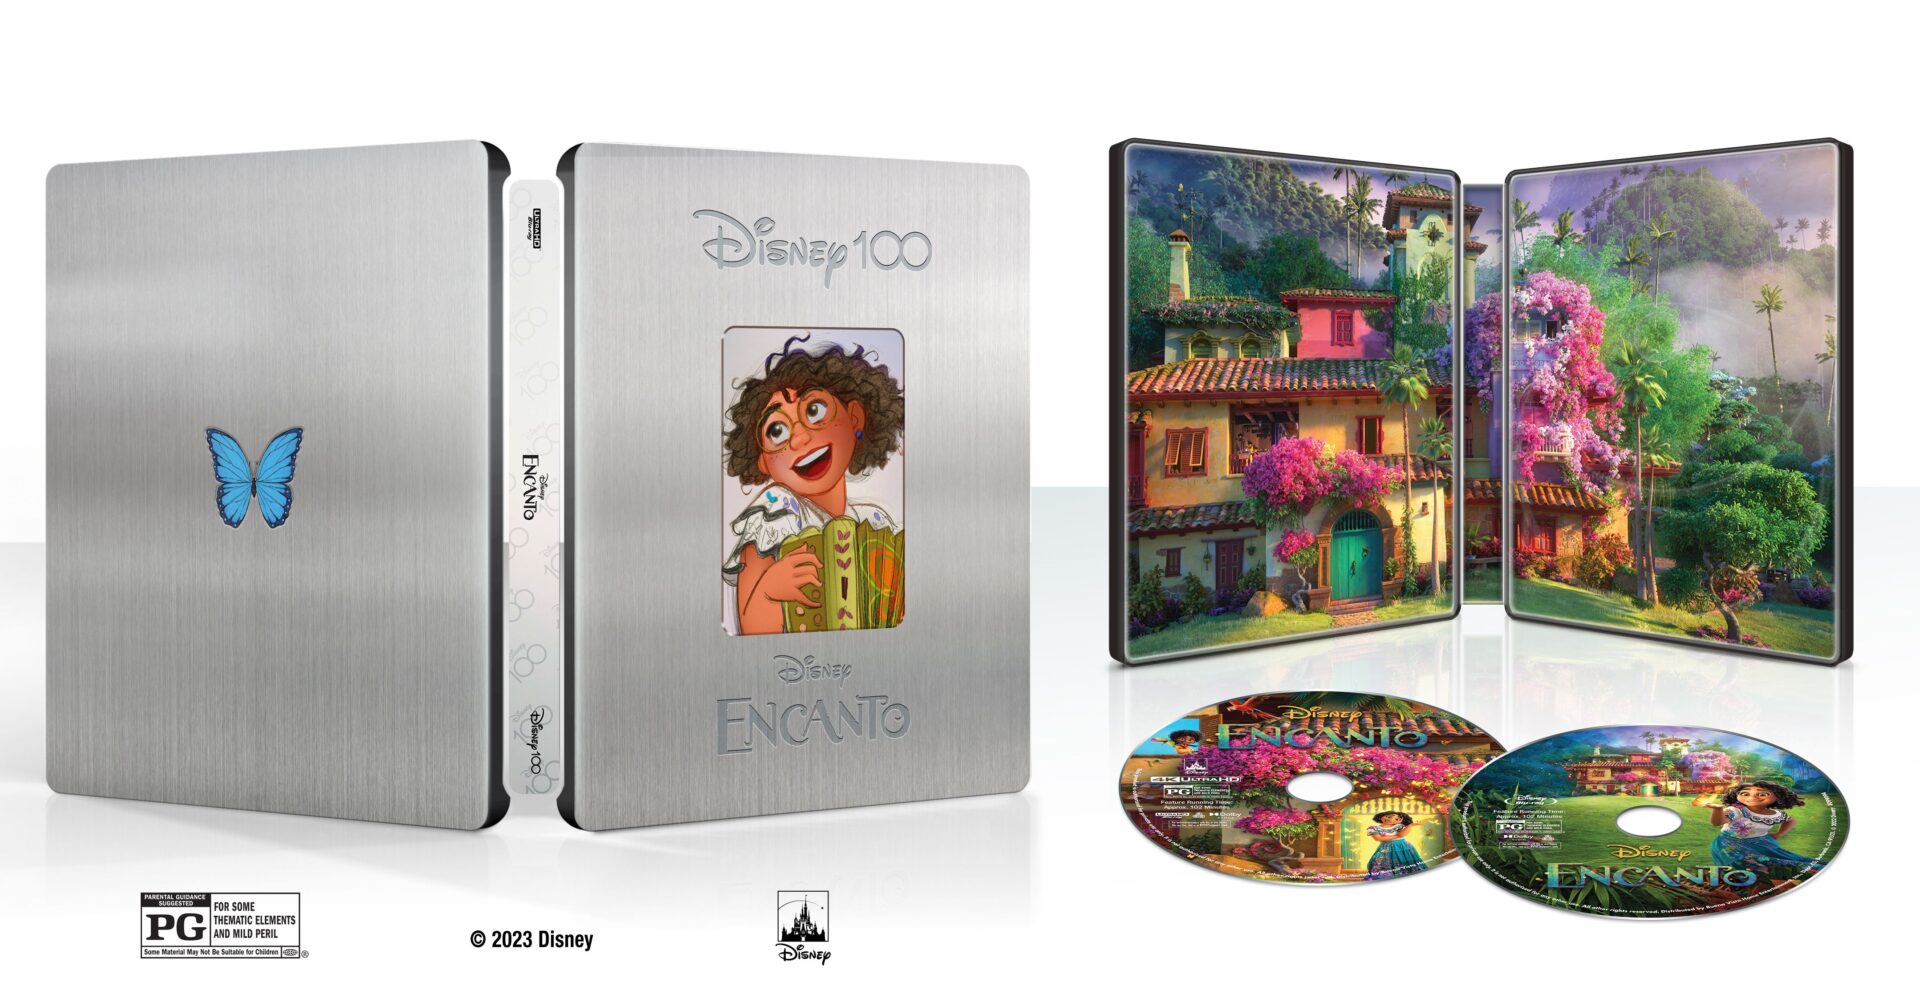 Special Edition Disney Movies Being Released for Disney100